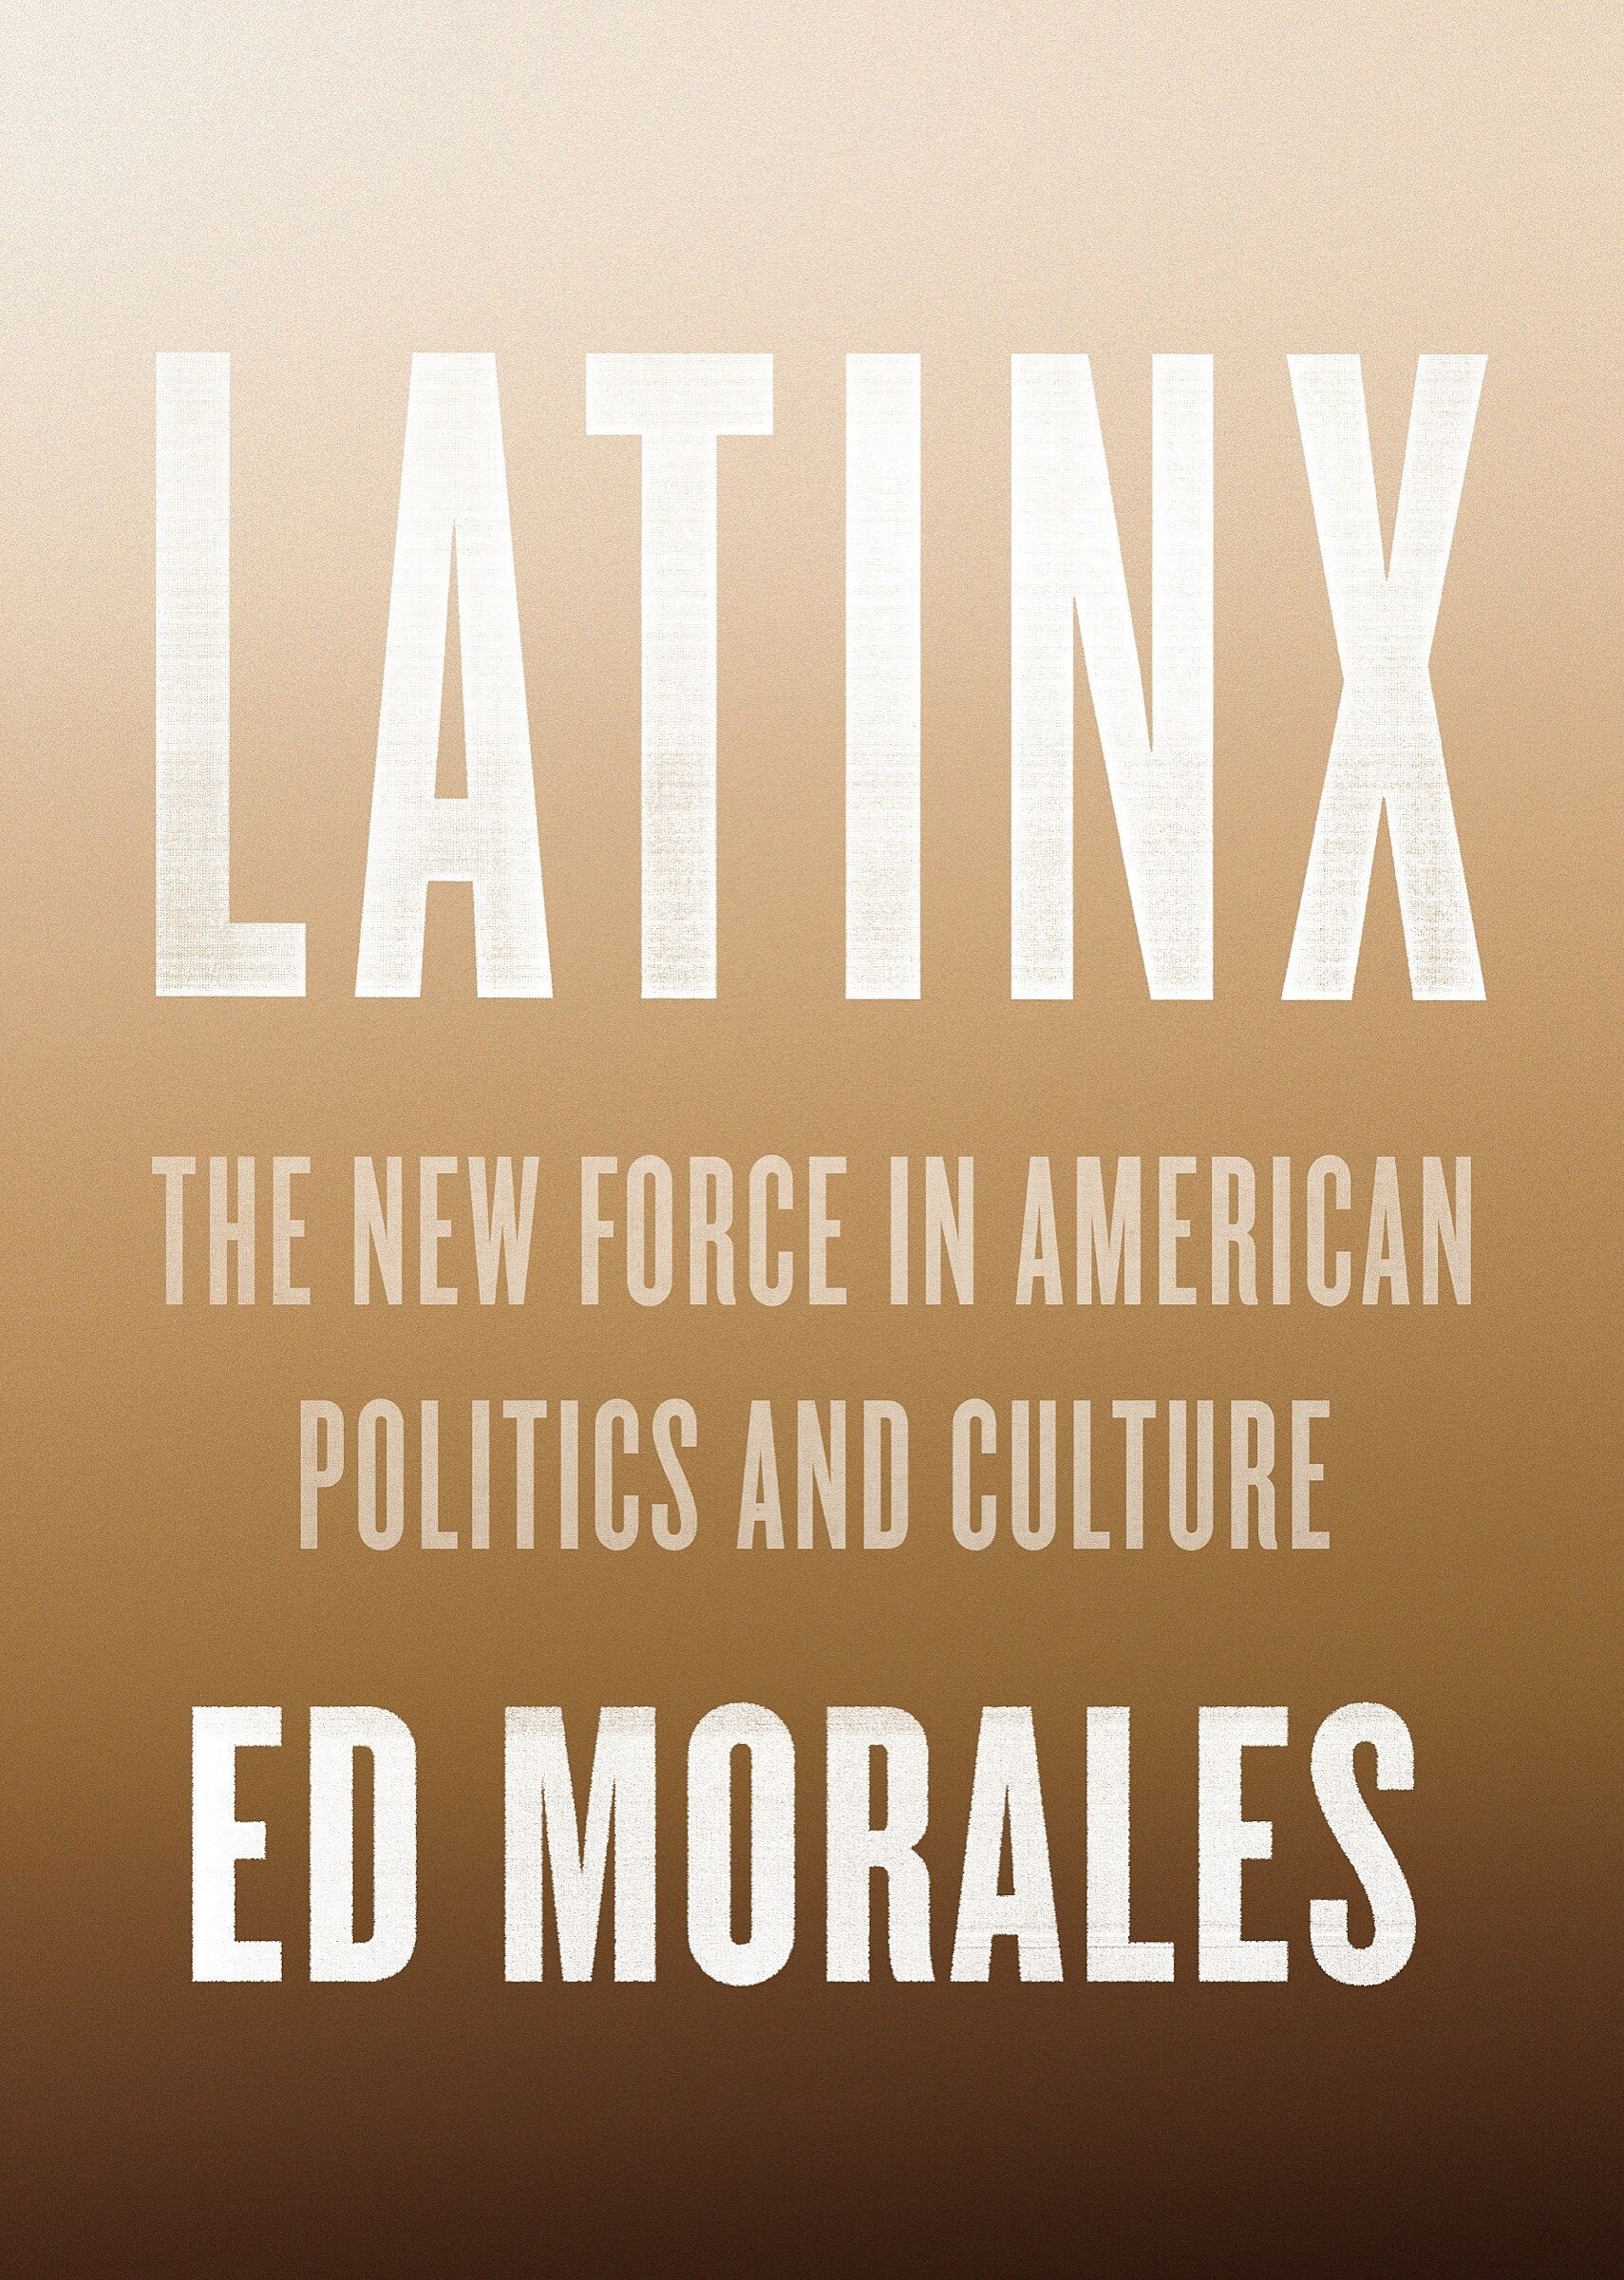 A book cover with a brown gradient background and bold text.